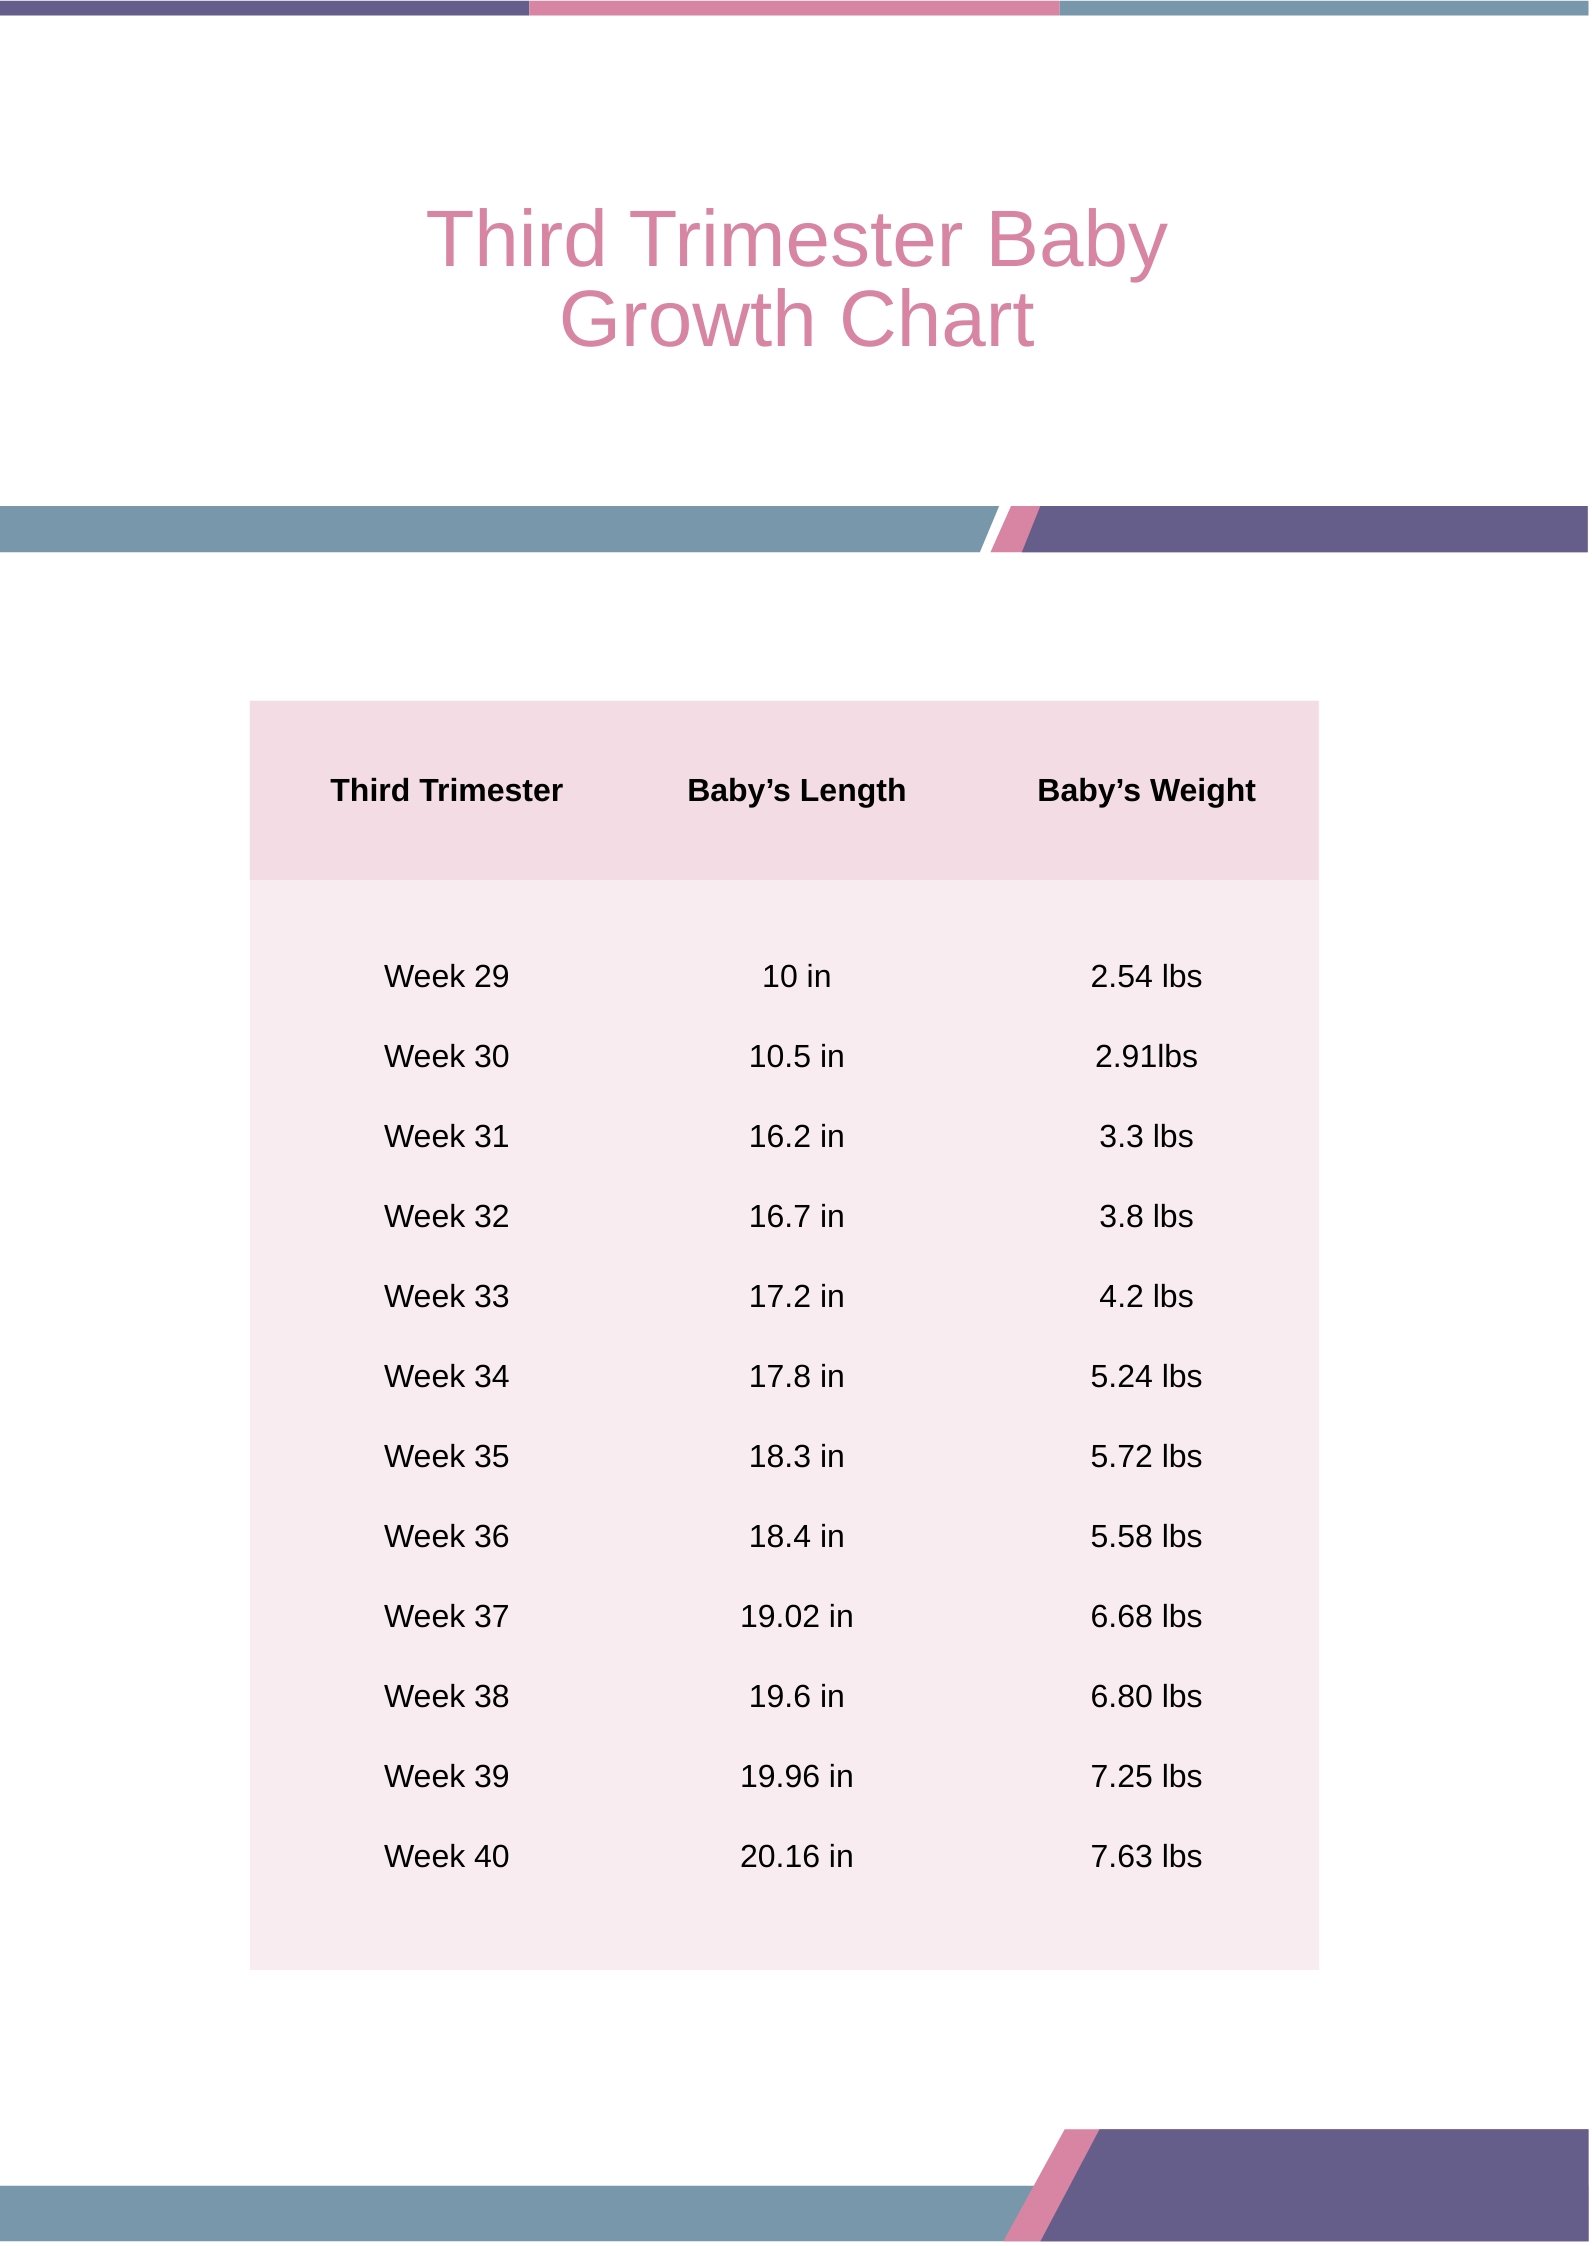 Third Trimester Baby Growth Chart in PDF